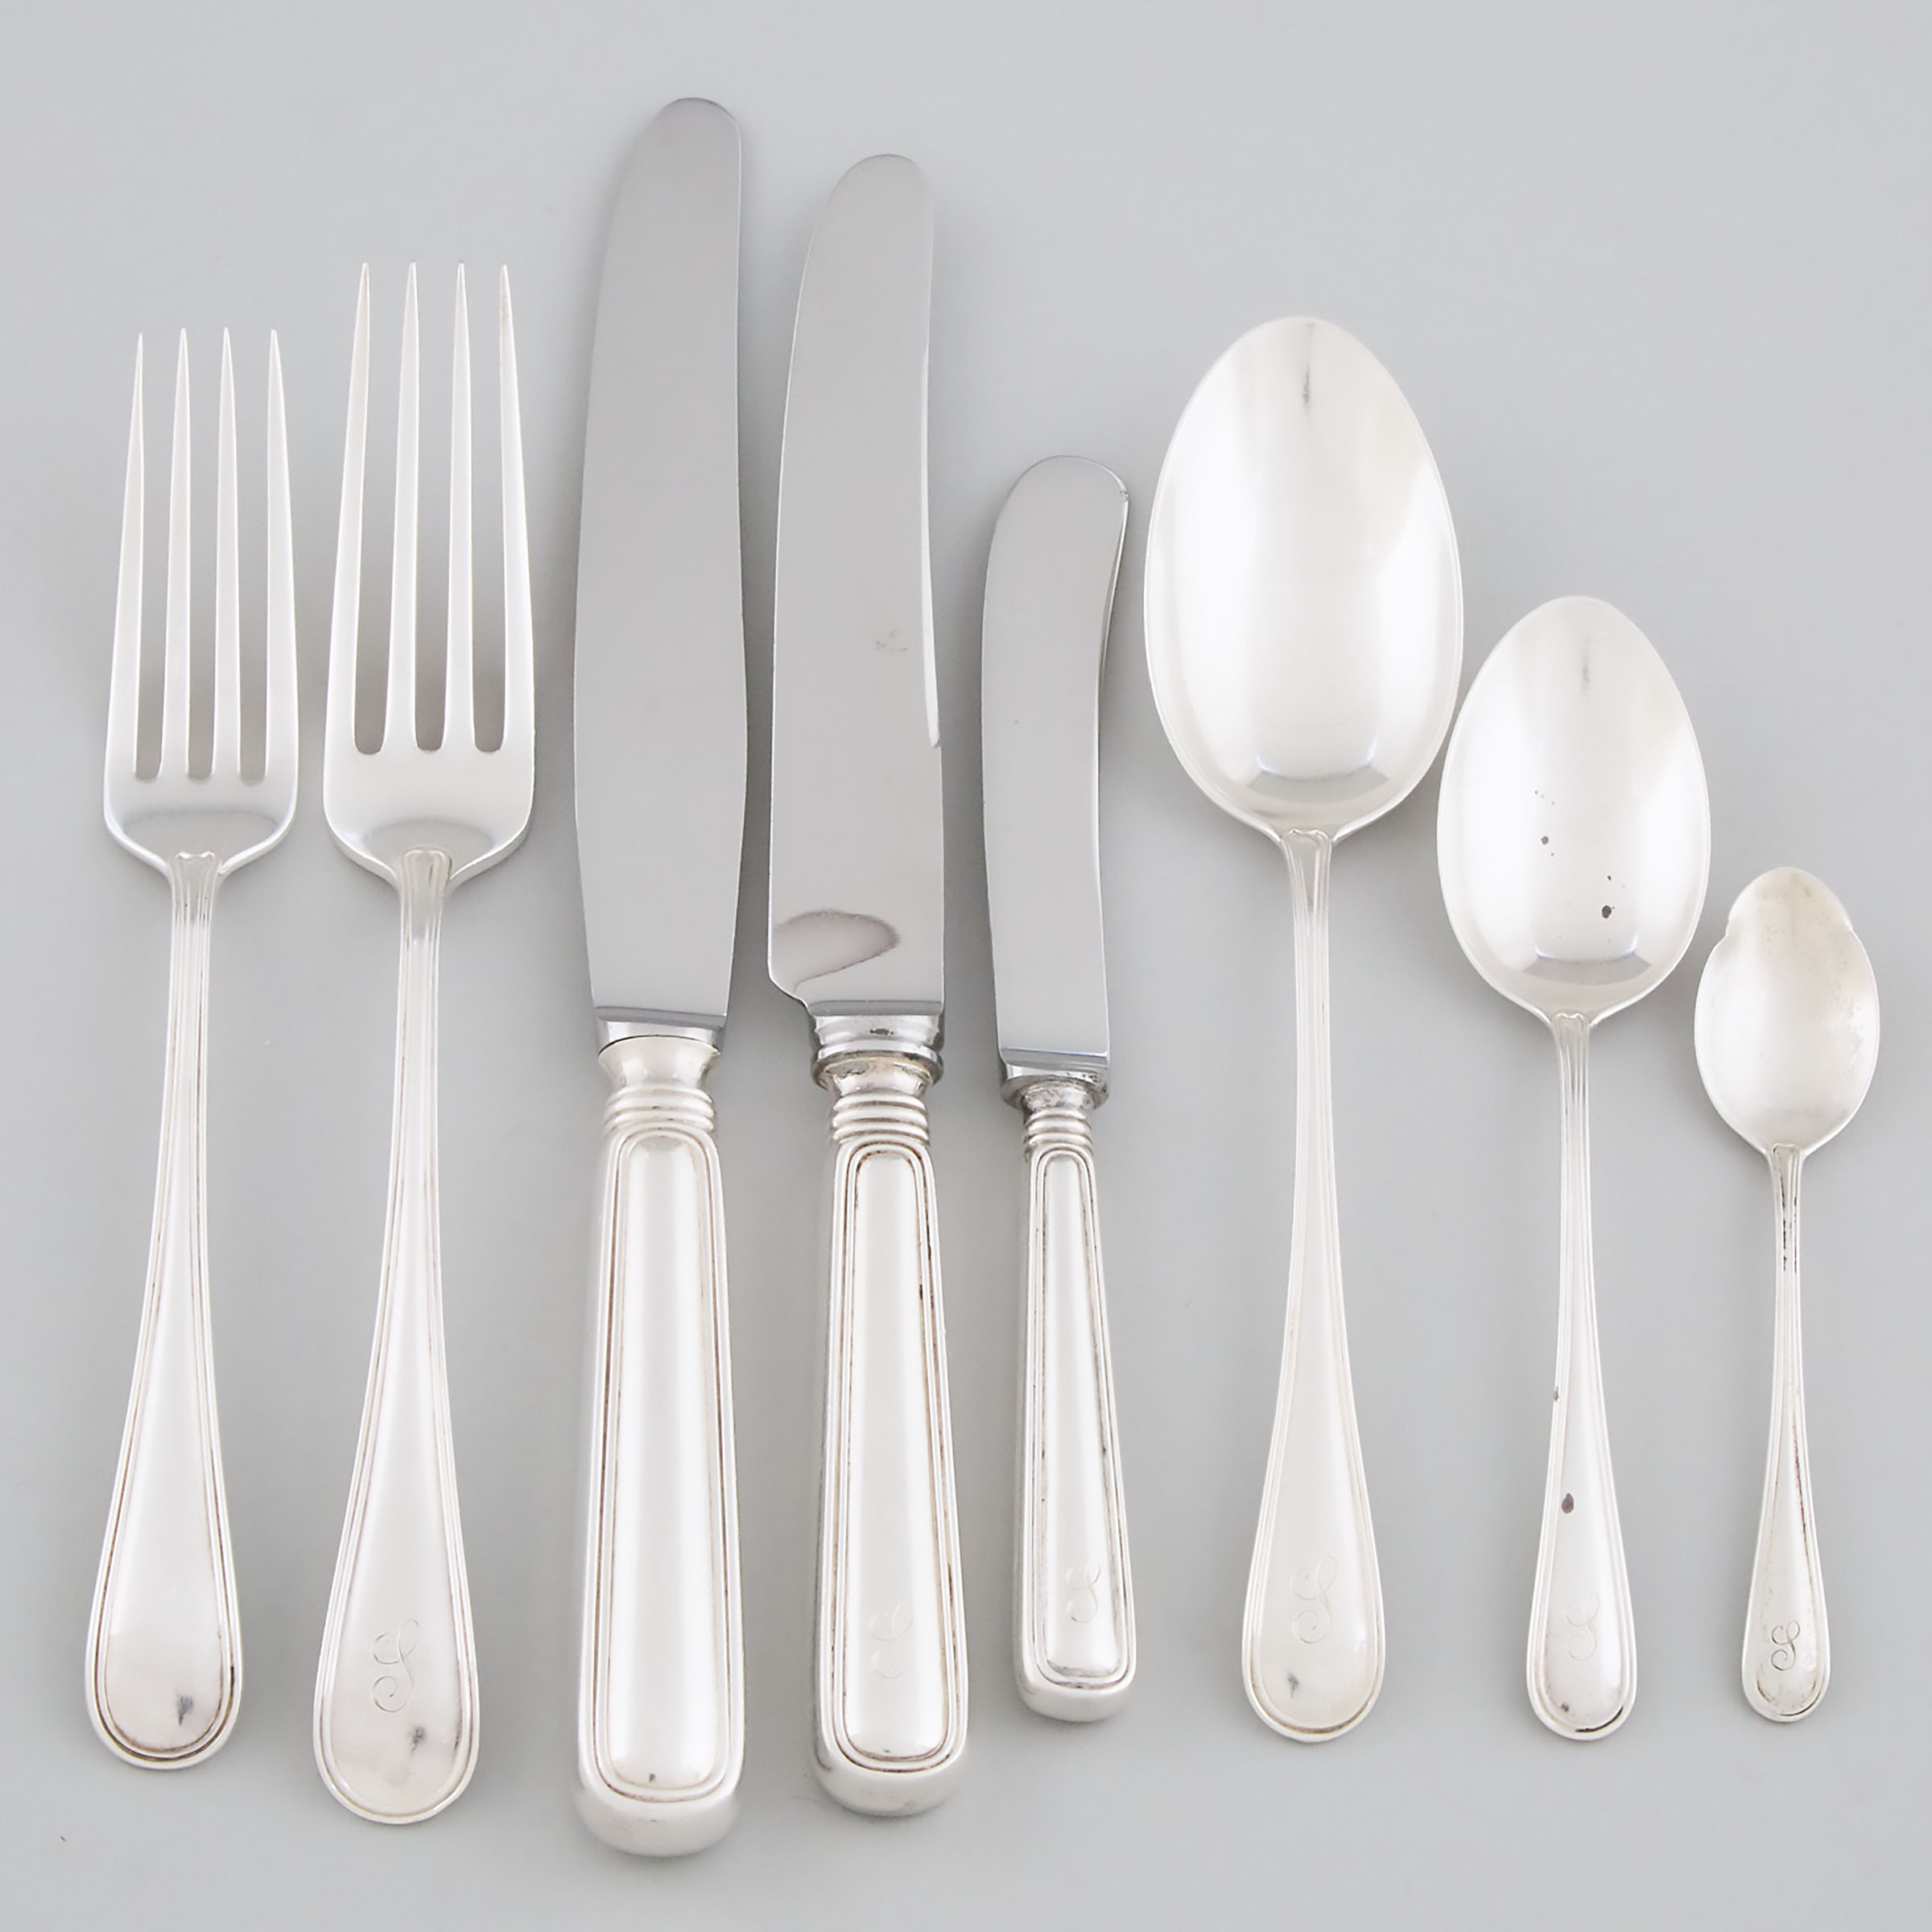 Canadian Silver ‘Saxon’ Pattern Flatware, Henry Birks & Sons, Montreal, Que., 20th century